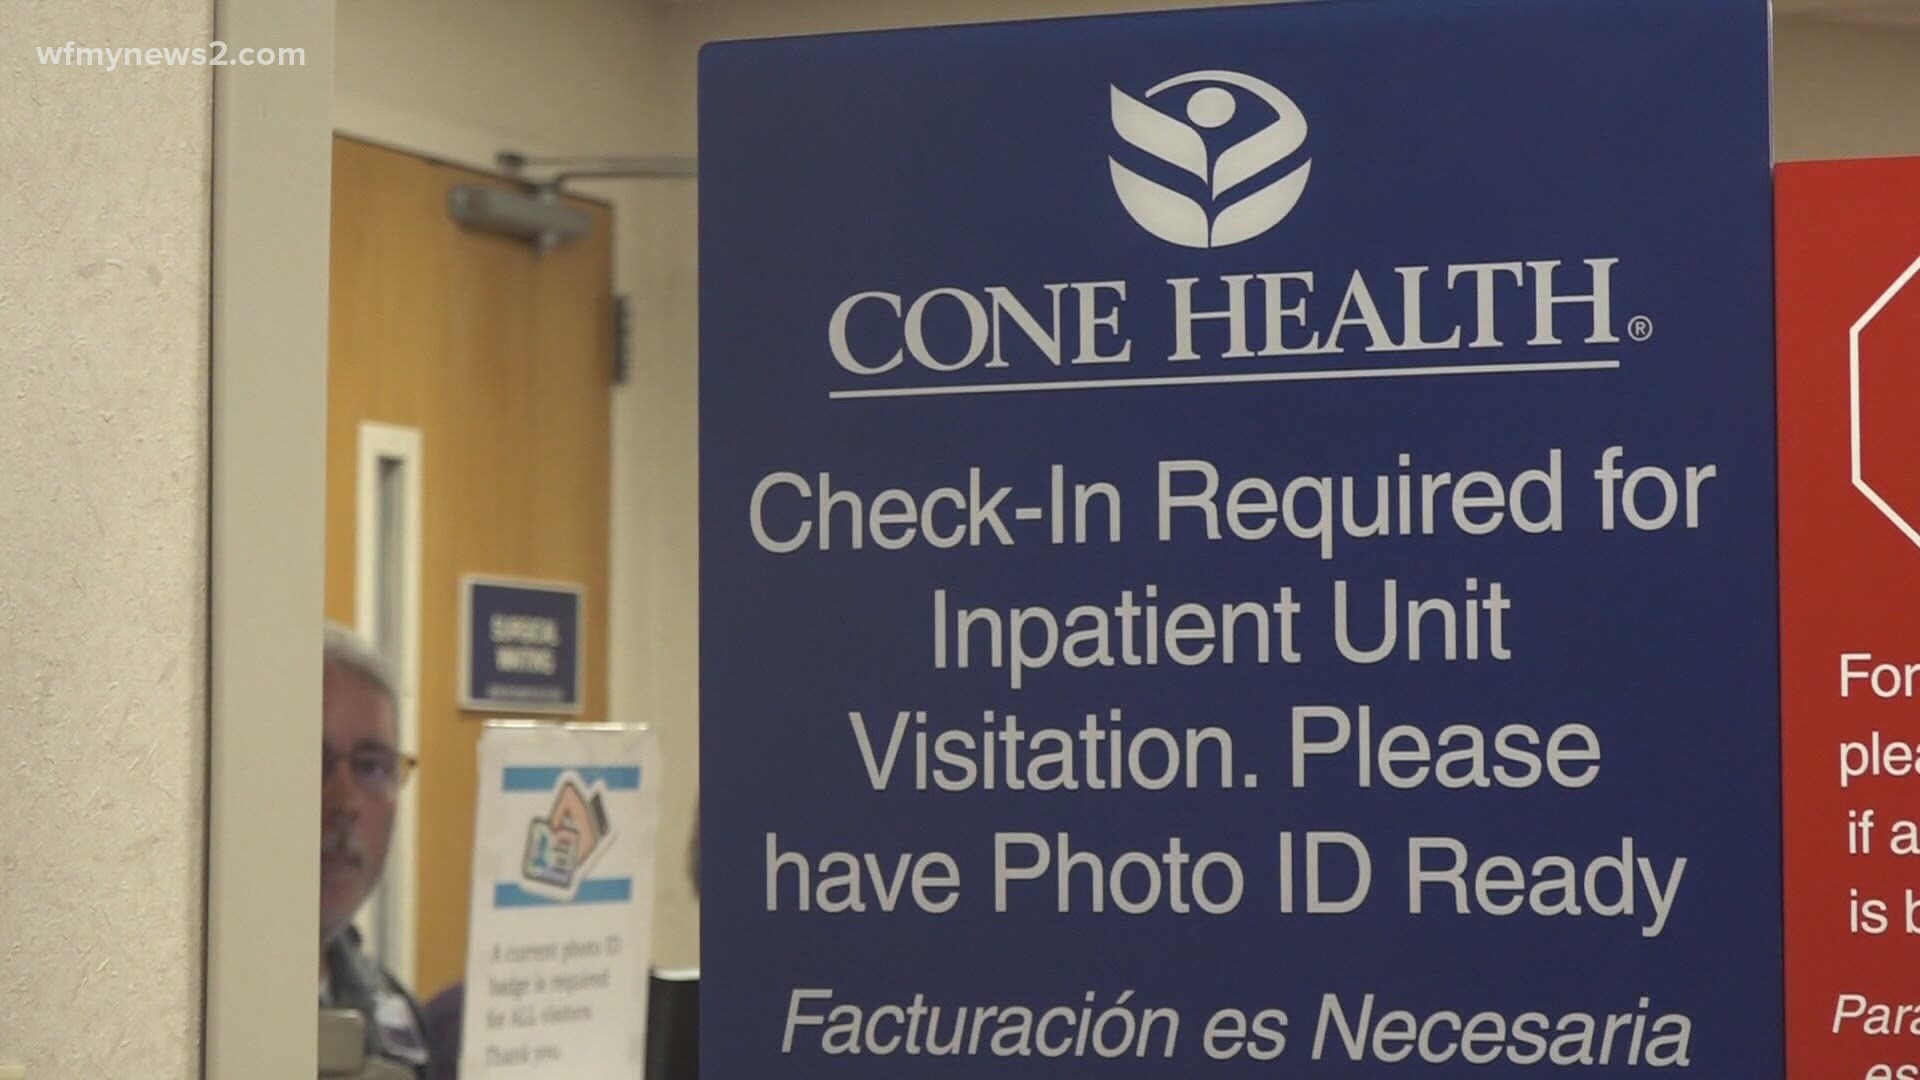 Medical professionals at Cone Health say COVID-19 patients could outnumber resources by the end of the year.